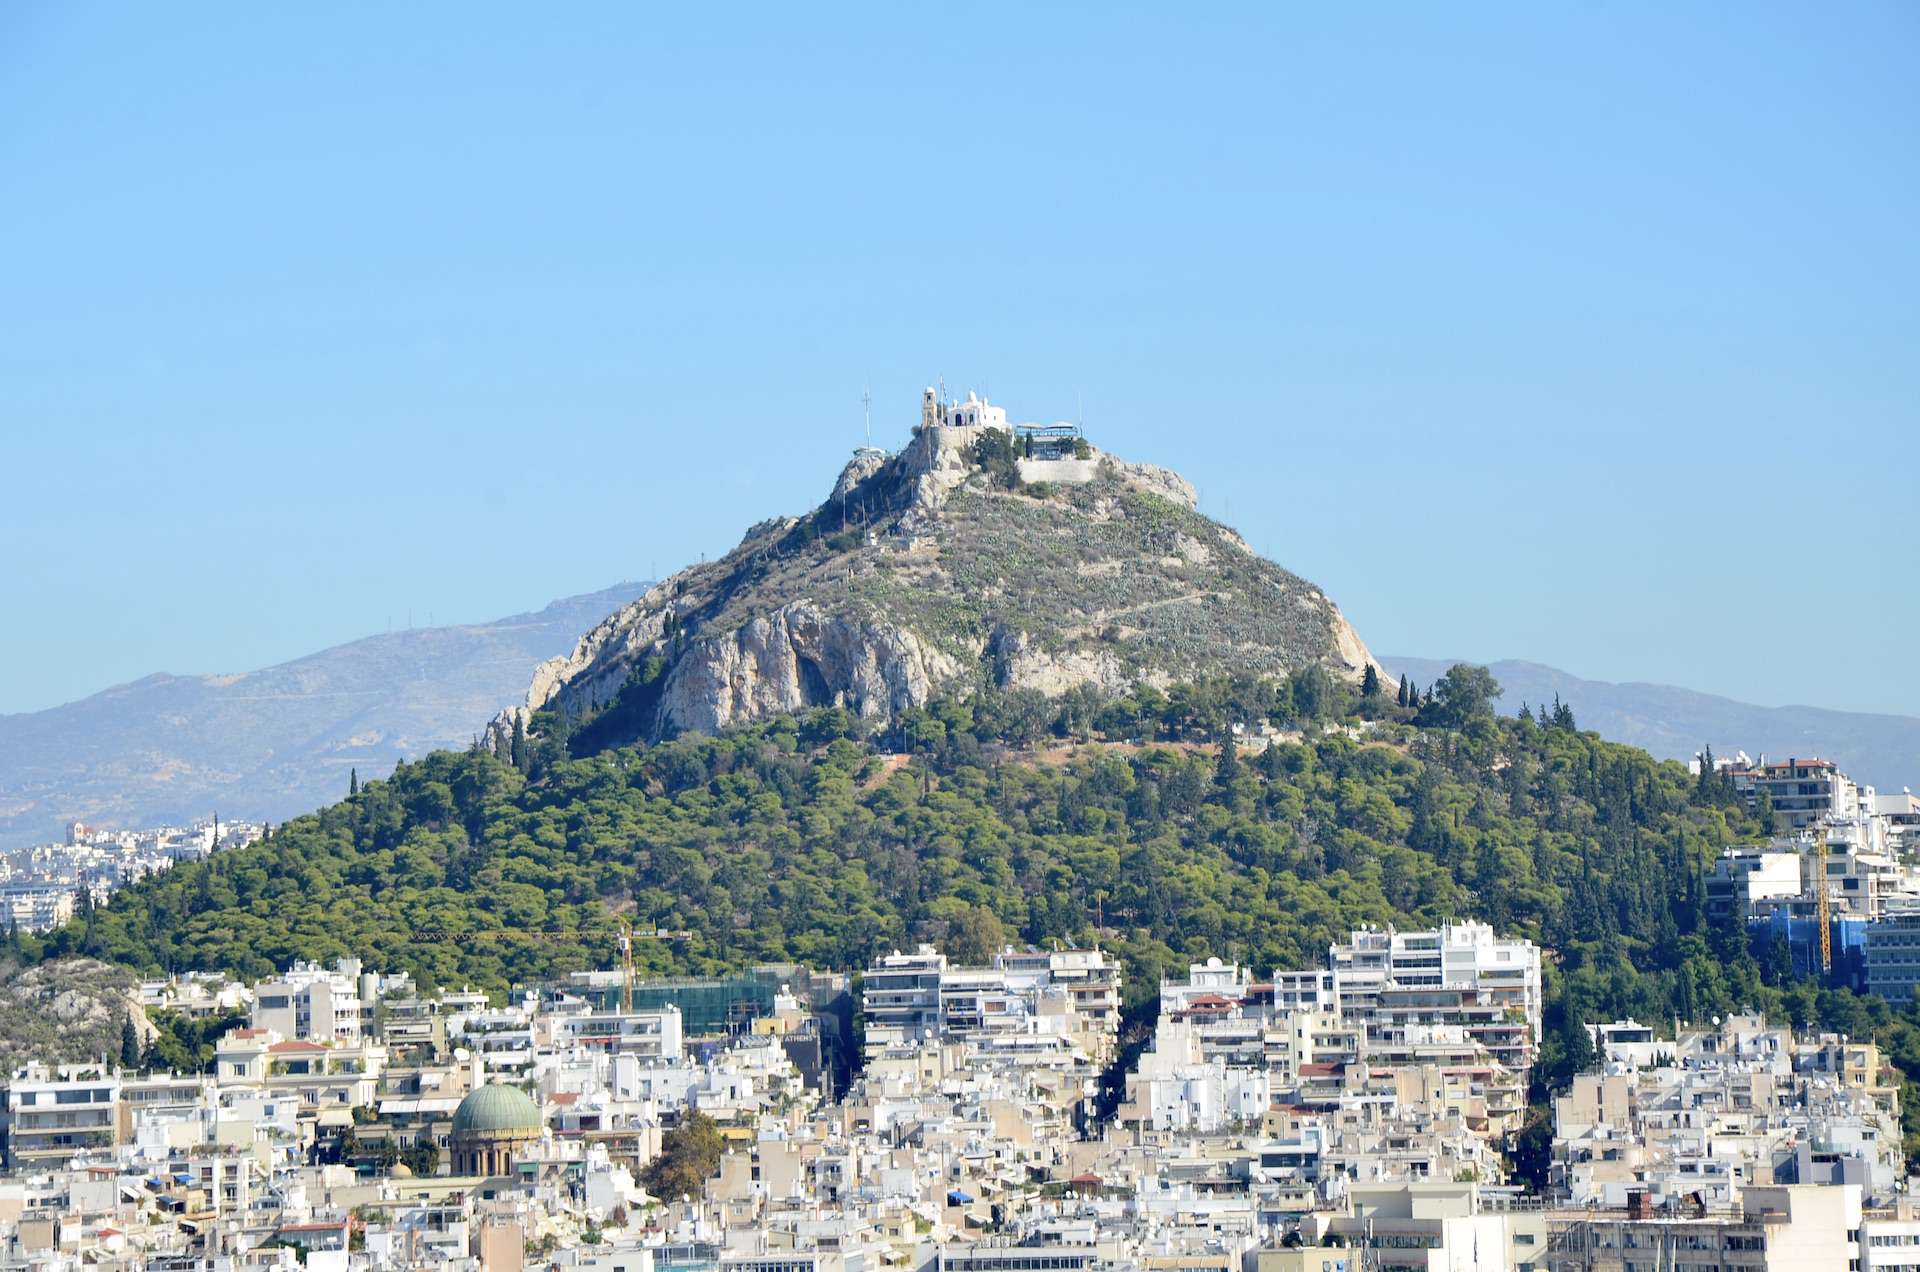 Lycabettus Hill in Athens, Greece